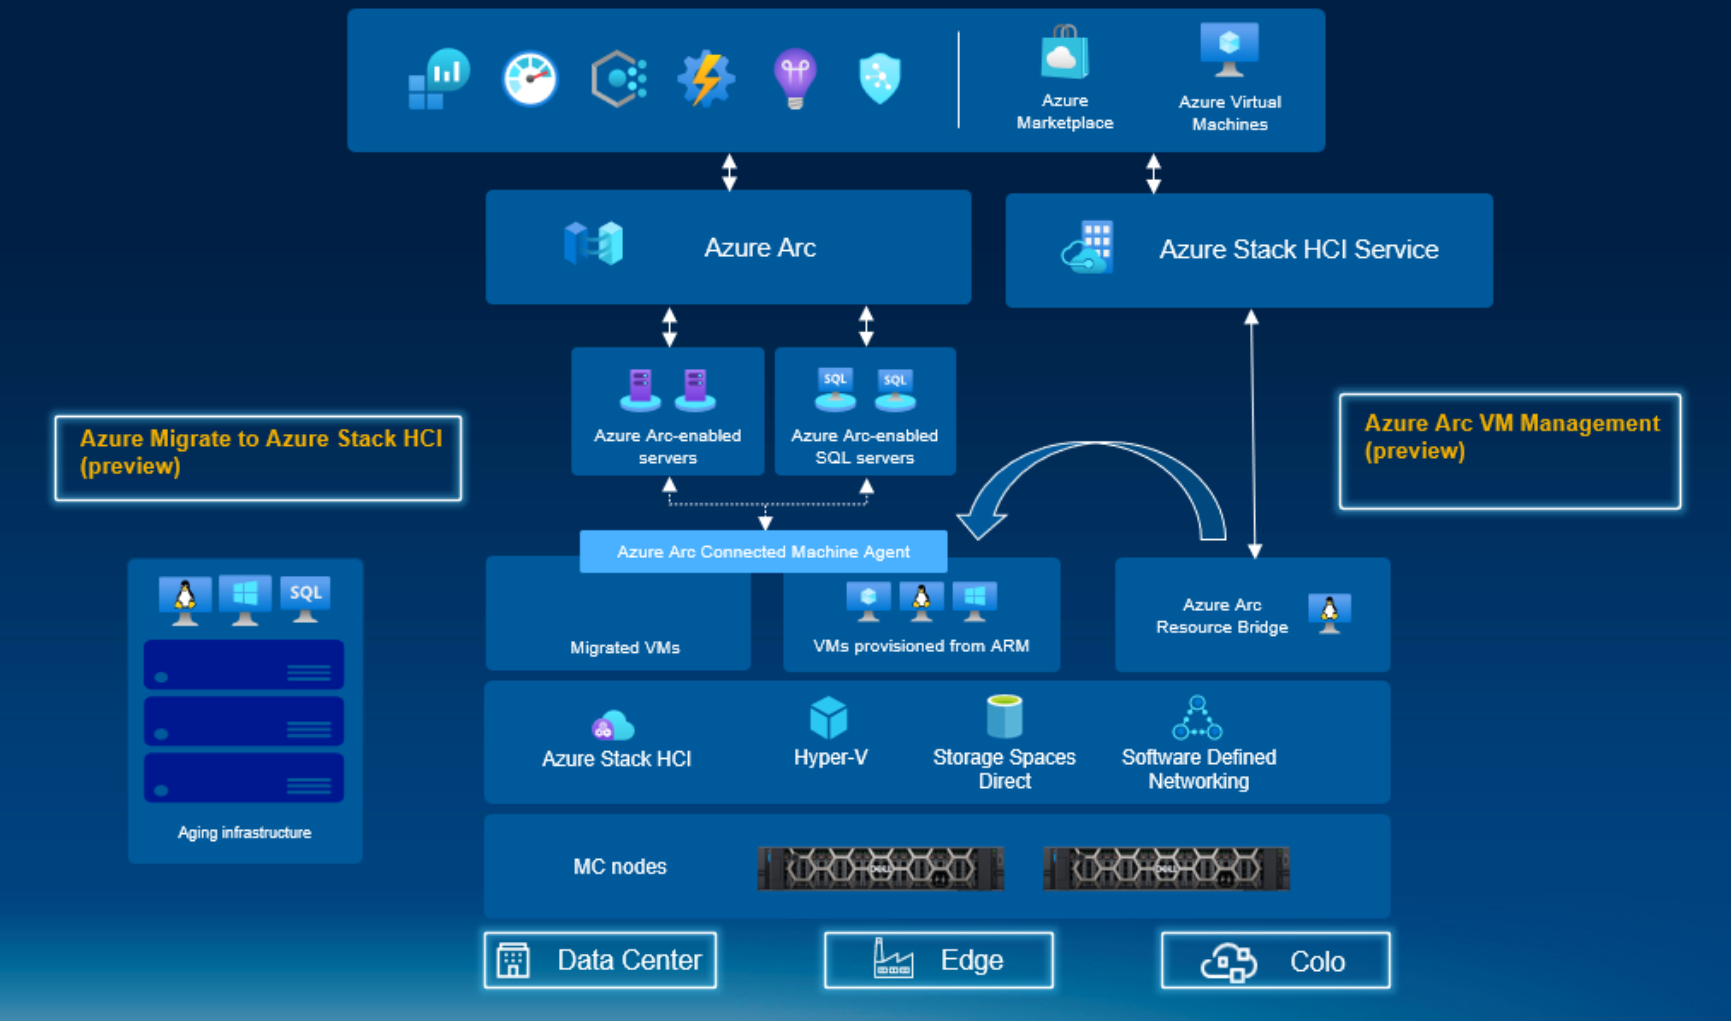 This figure shows the full APEX Cloud Platform architecture, fully capable of providing a VM provisioning service. It details all the layers, from the MC nodes, through the Azure Stack HCI layer, Azure ARC Resource Manager, Azure ARC, and Azure public cloud.